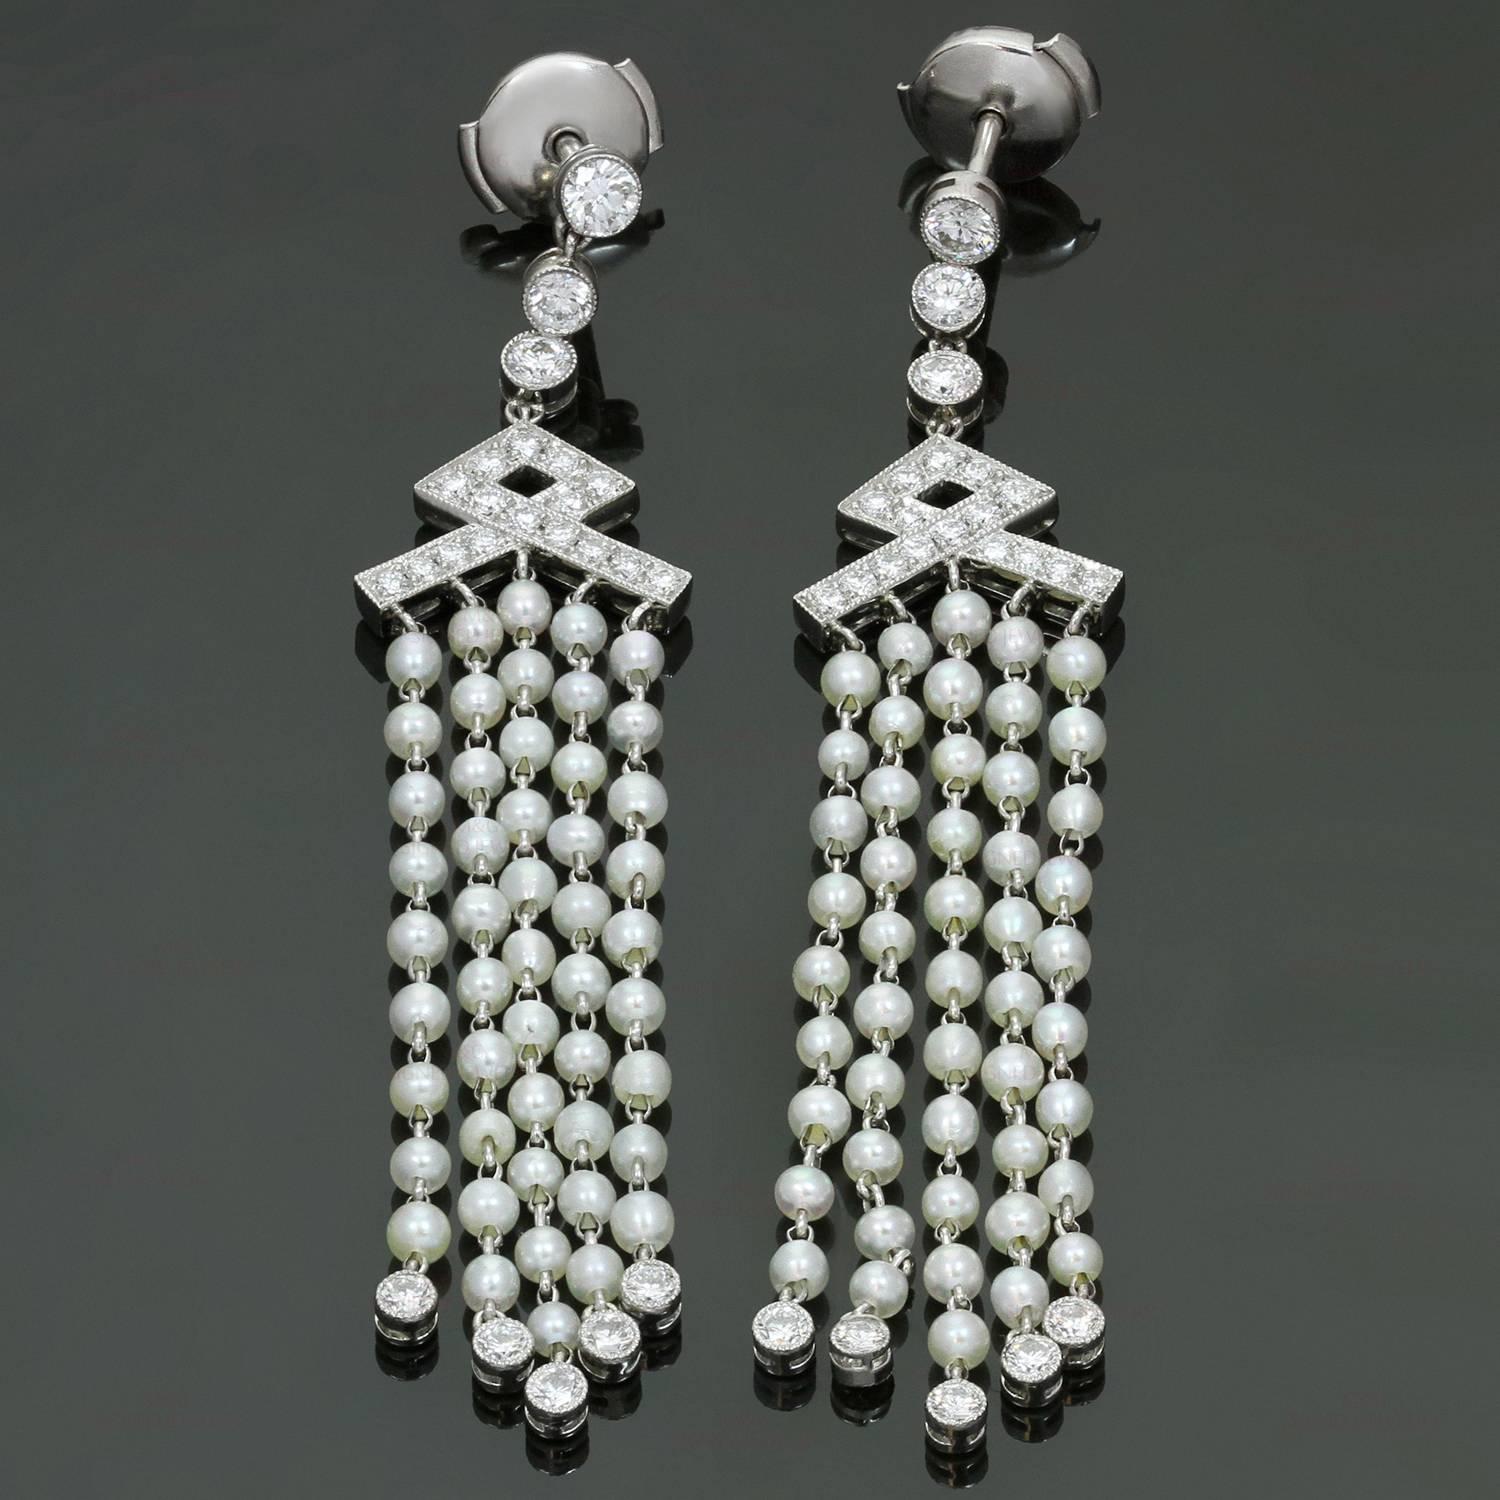 These exquisite Tiffany earrings feature natural seed pearls set in platinum and accented with round brilliant-cut diamonds of an estimated 1.20 carats. Named seed pearls are called so because of their diminutive size, and these lustrous natural